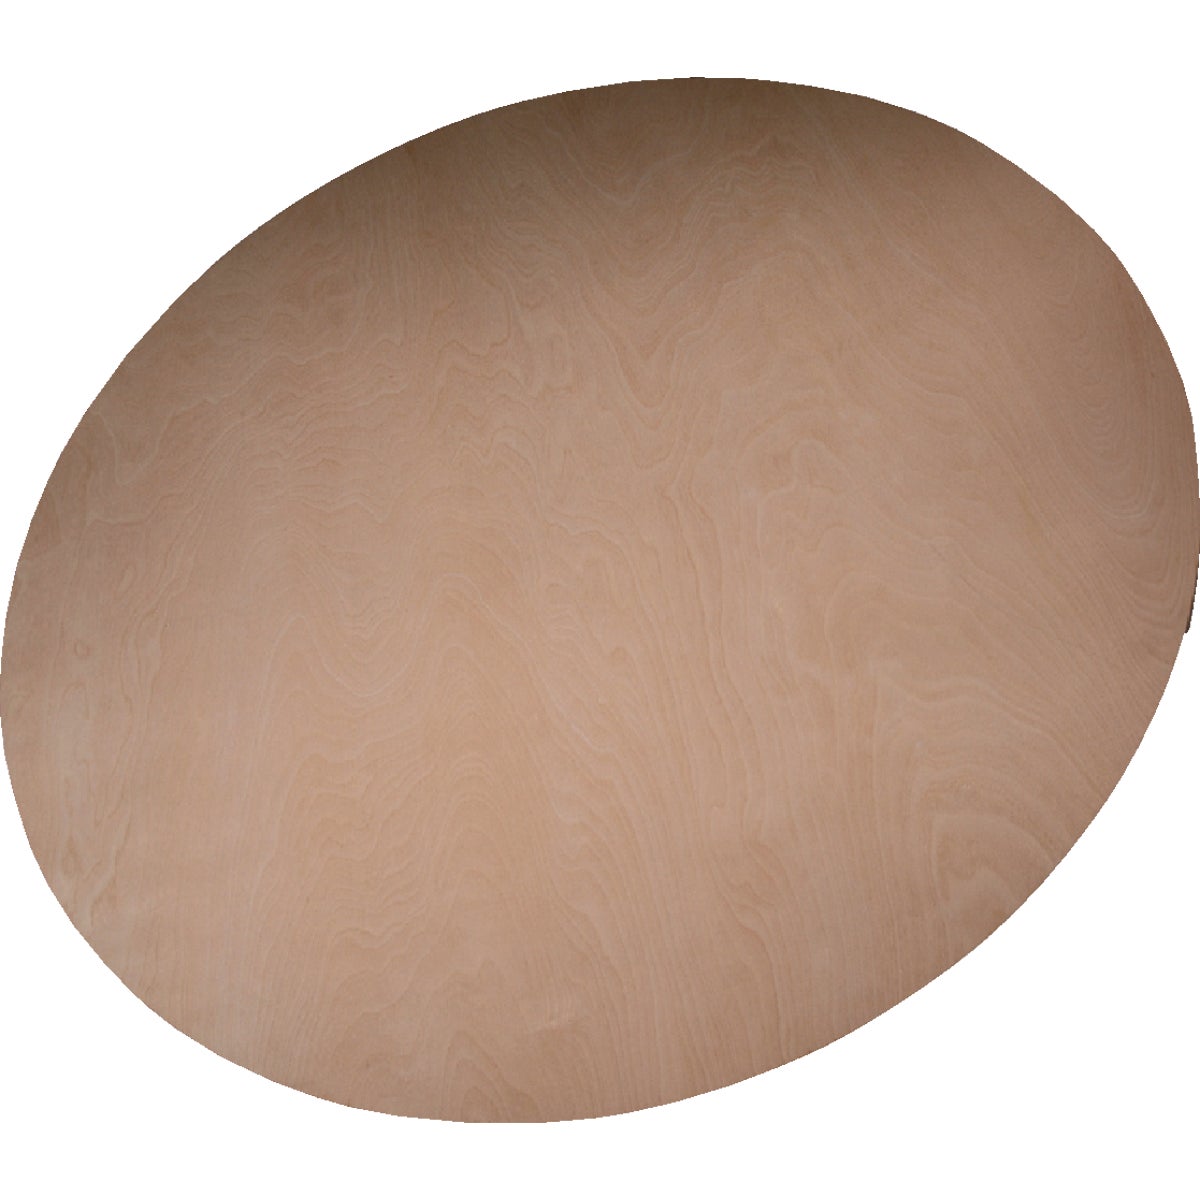 Alexandria Moulding 3/4 In. x 36 In. Plywood Round